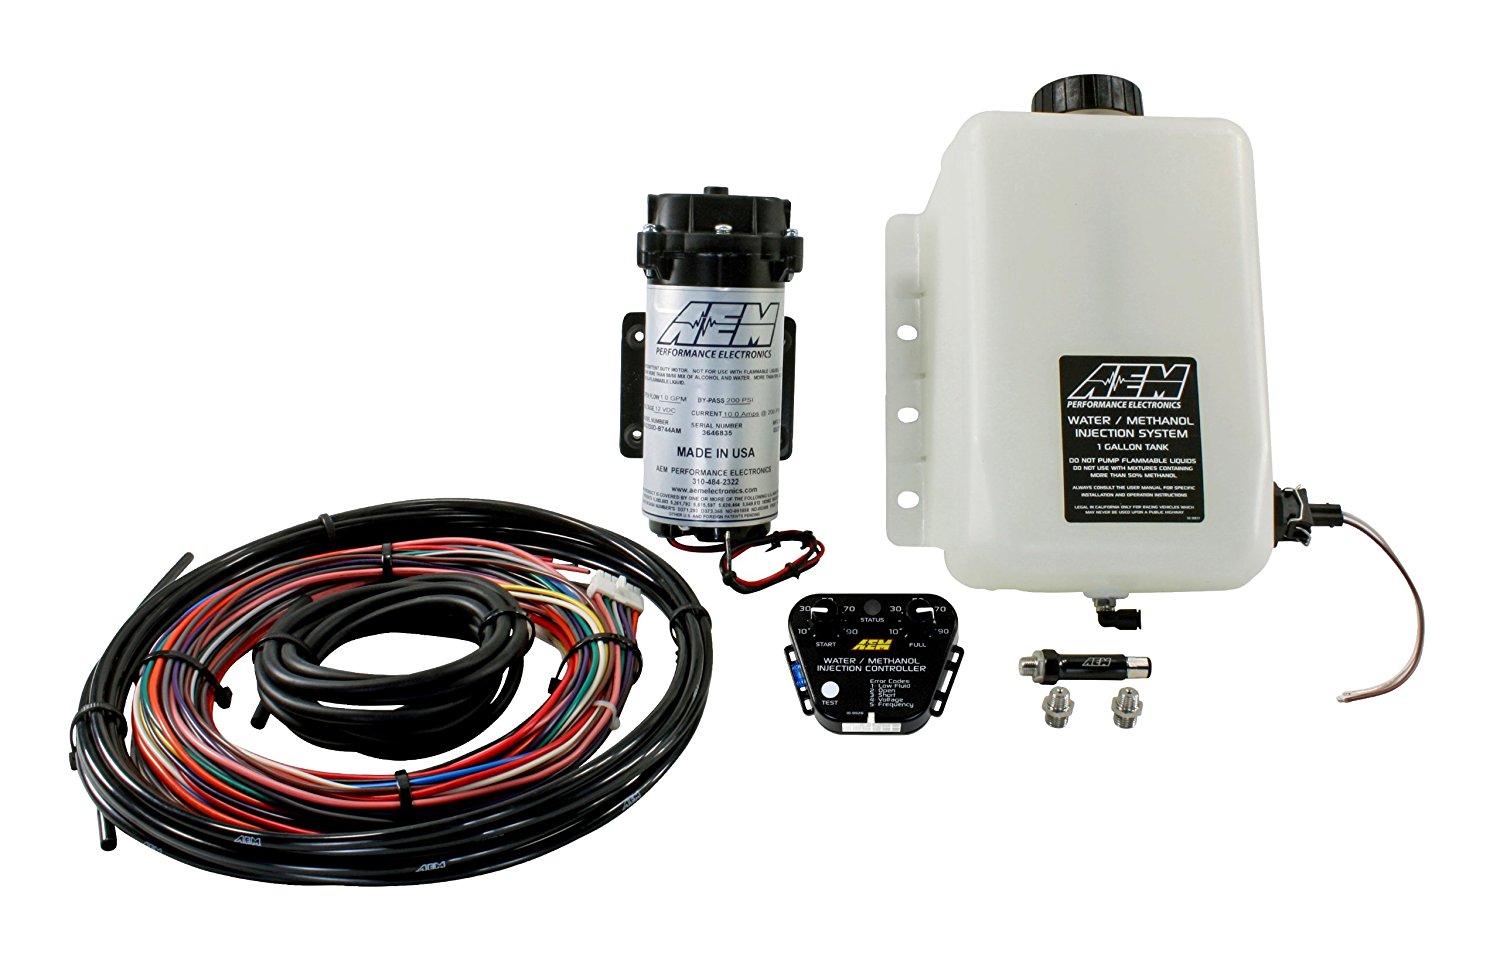 AEM V2 1-Gallon Water/Methanol Injection Kit with Multi-Input Controller for Corvette, Camaro and others